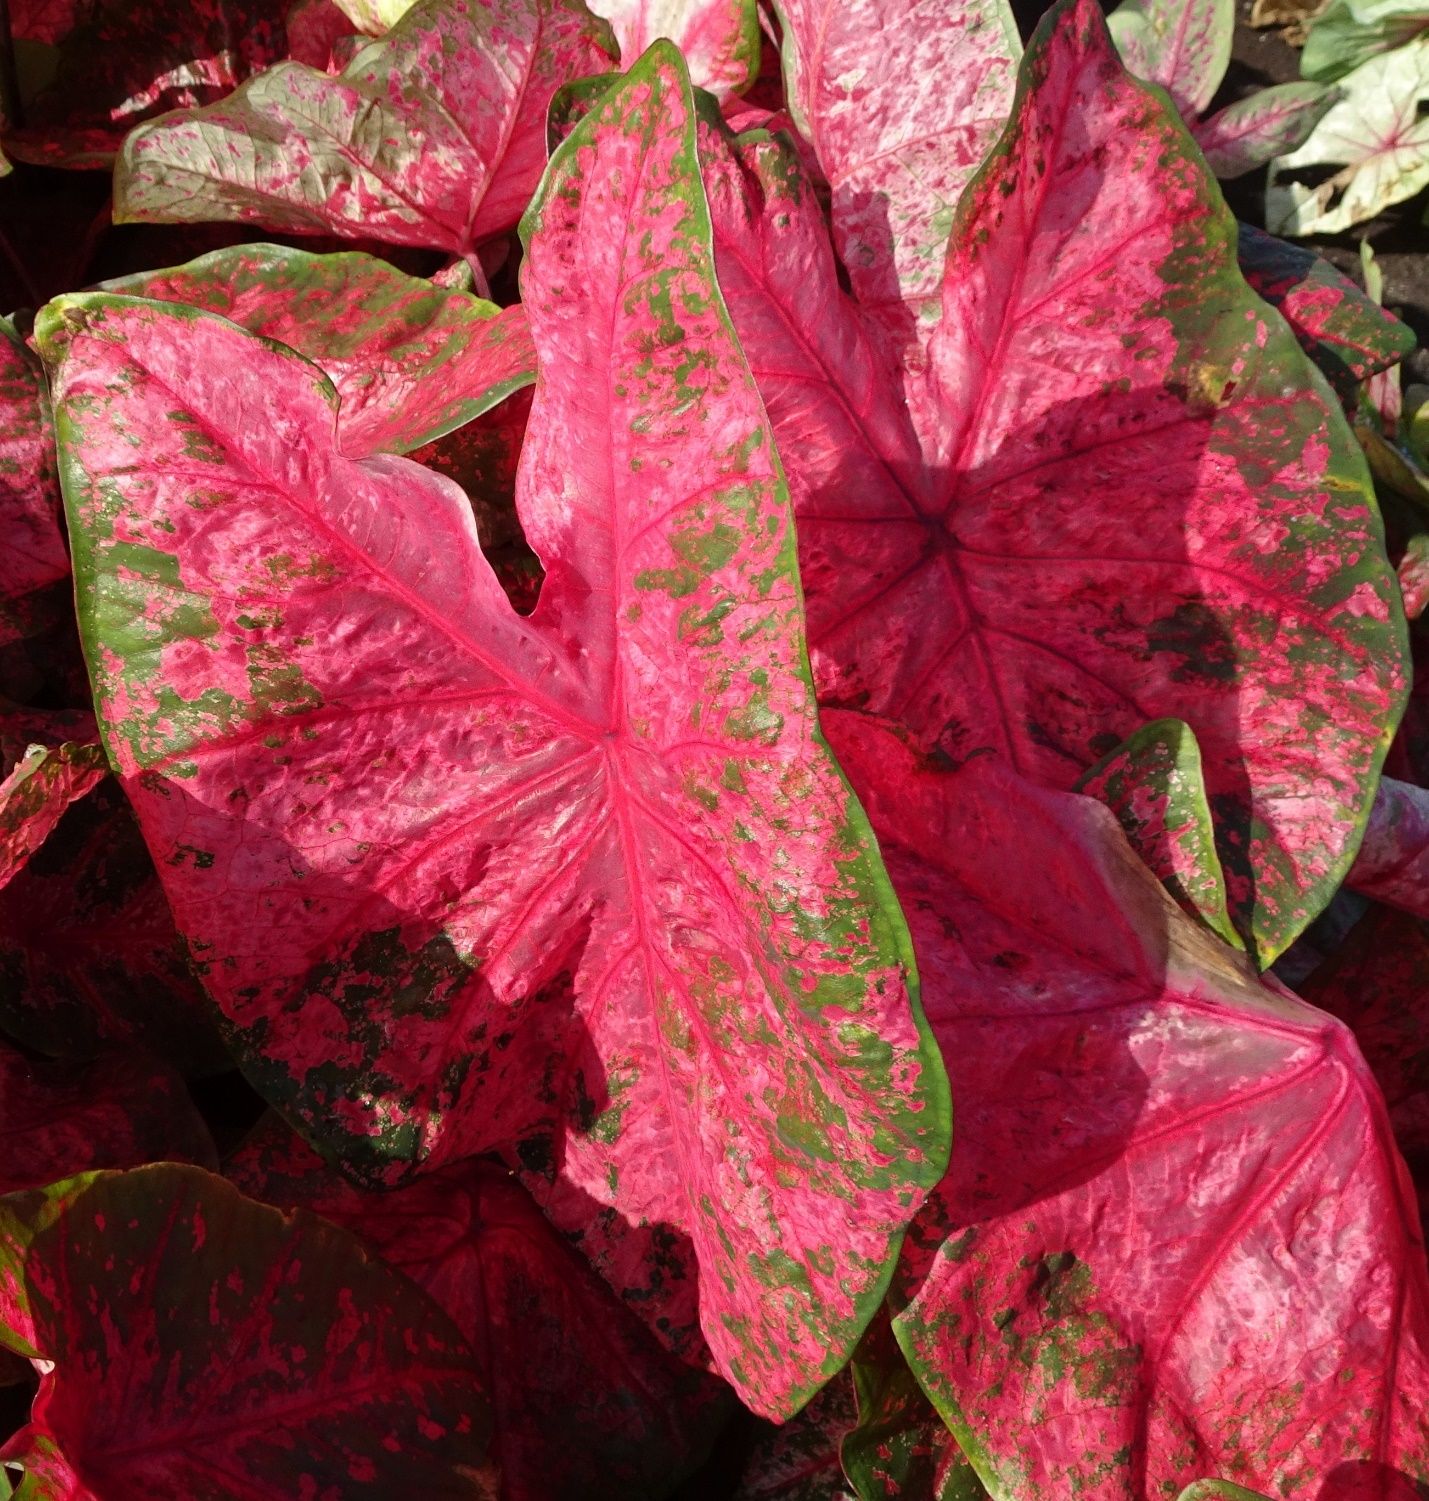 Typical leaves of ‘Lava Glow’ caladium in grower trials in open fields and full sun. Photo taken in Lake Placid, FL on 13 September 2019. 